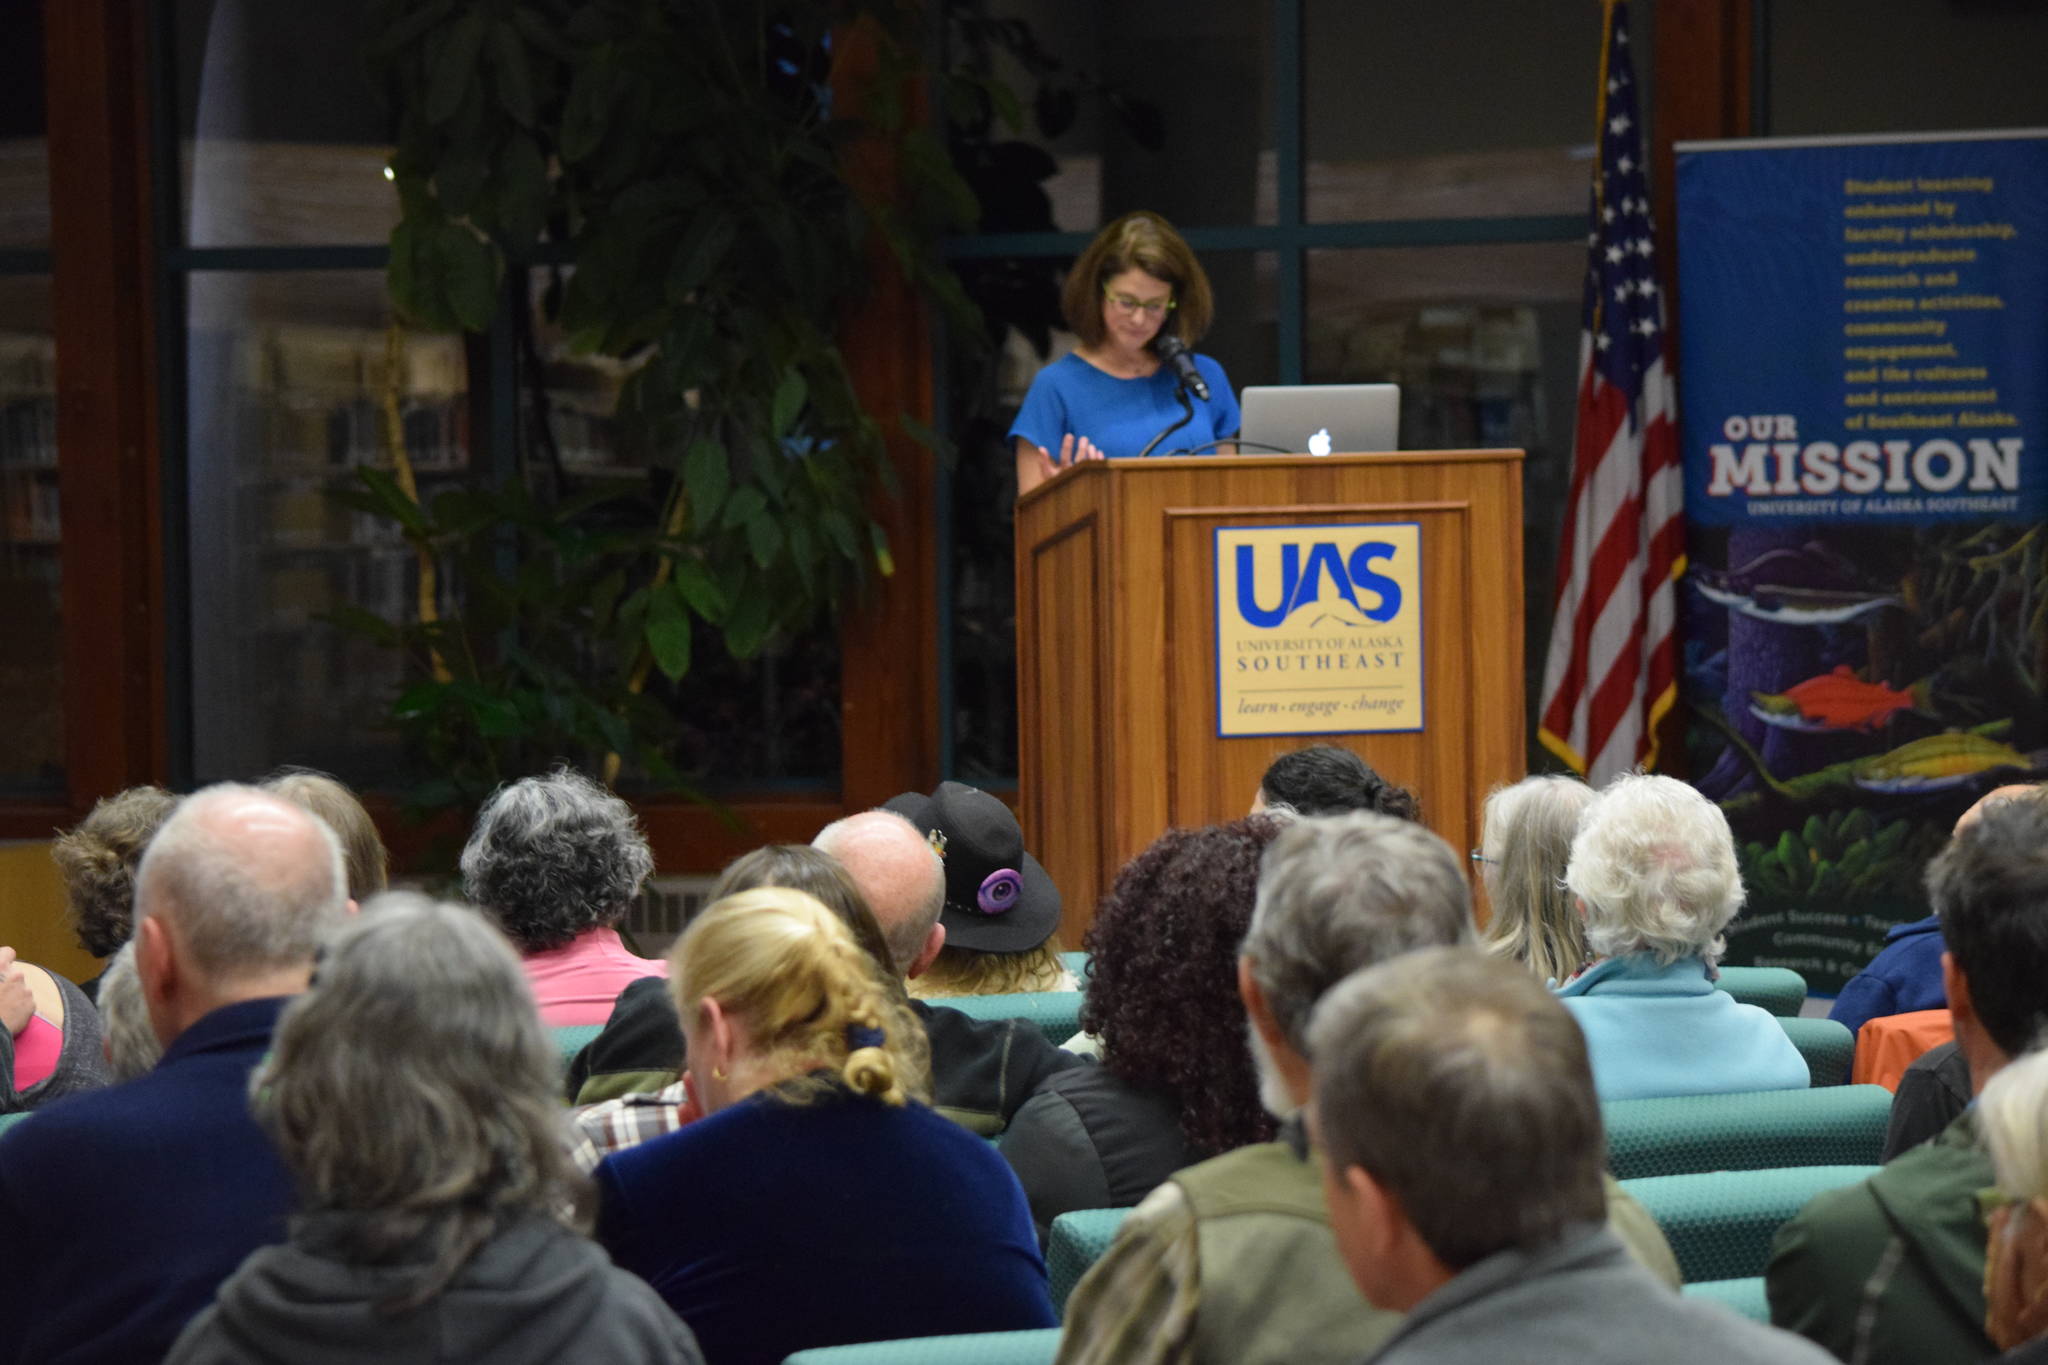 Dr. Lora Vess at a lecture on food security on Friday at the University of Alaska Southeast. (Kevin Gullufsen | Juneau Empire)